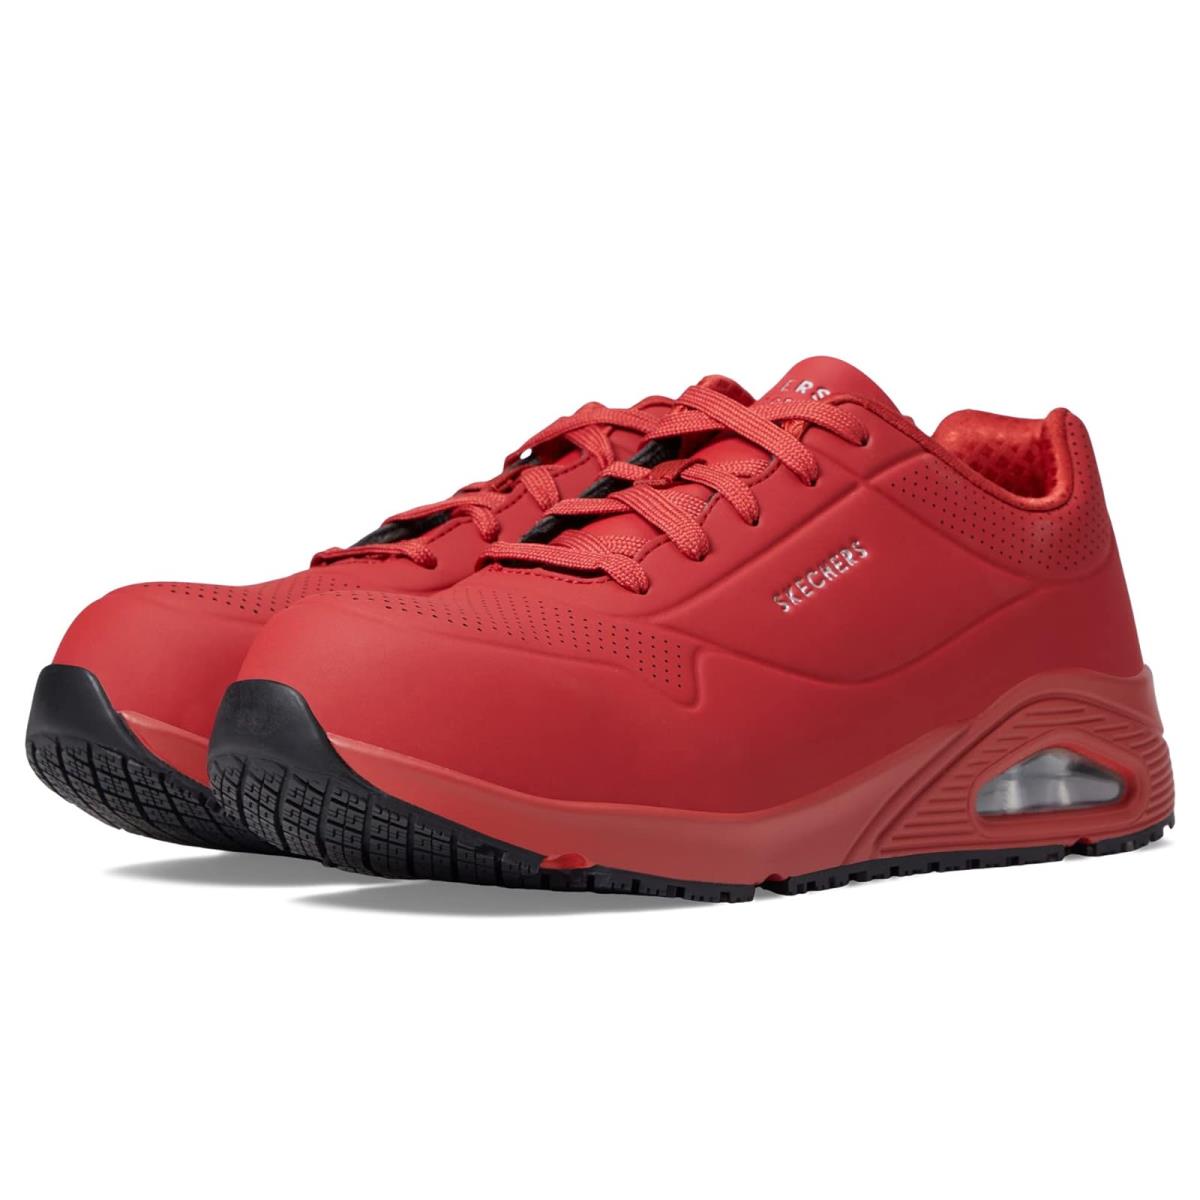 Woman`s Sneakers Athletic Shoes Skechers Work Uno SR Comp Toe Red